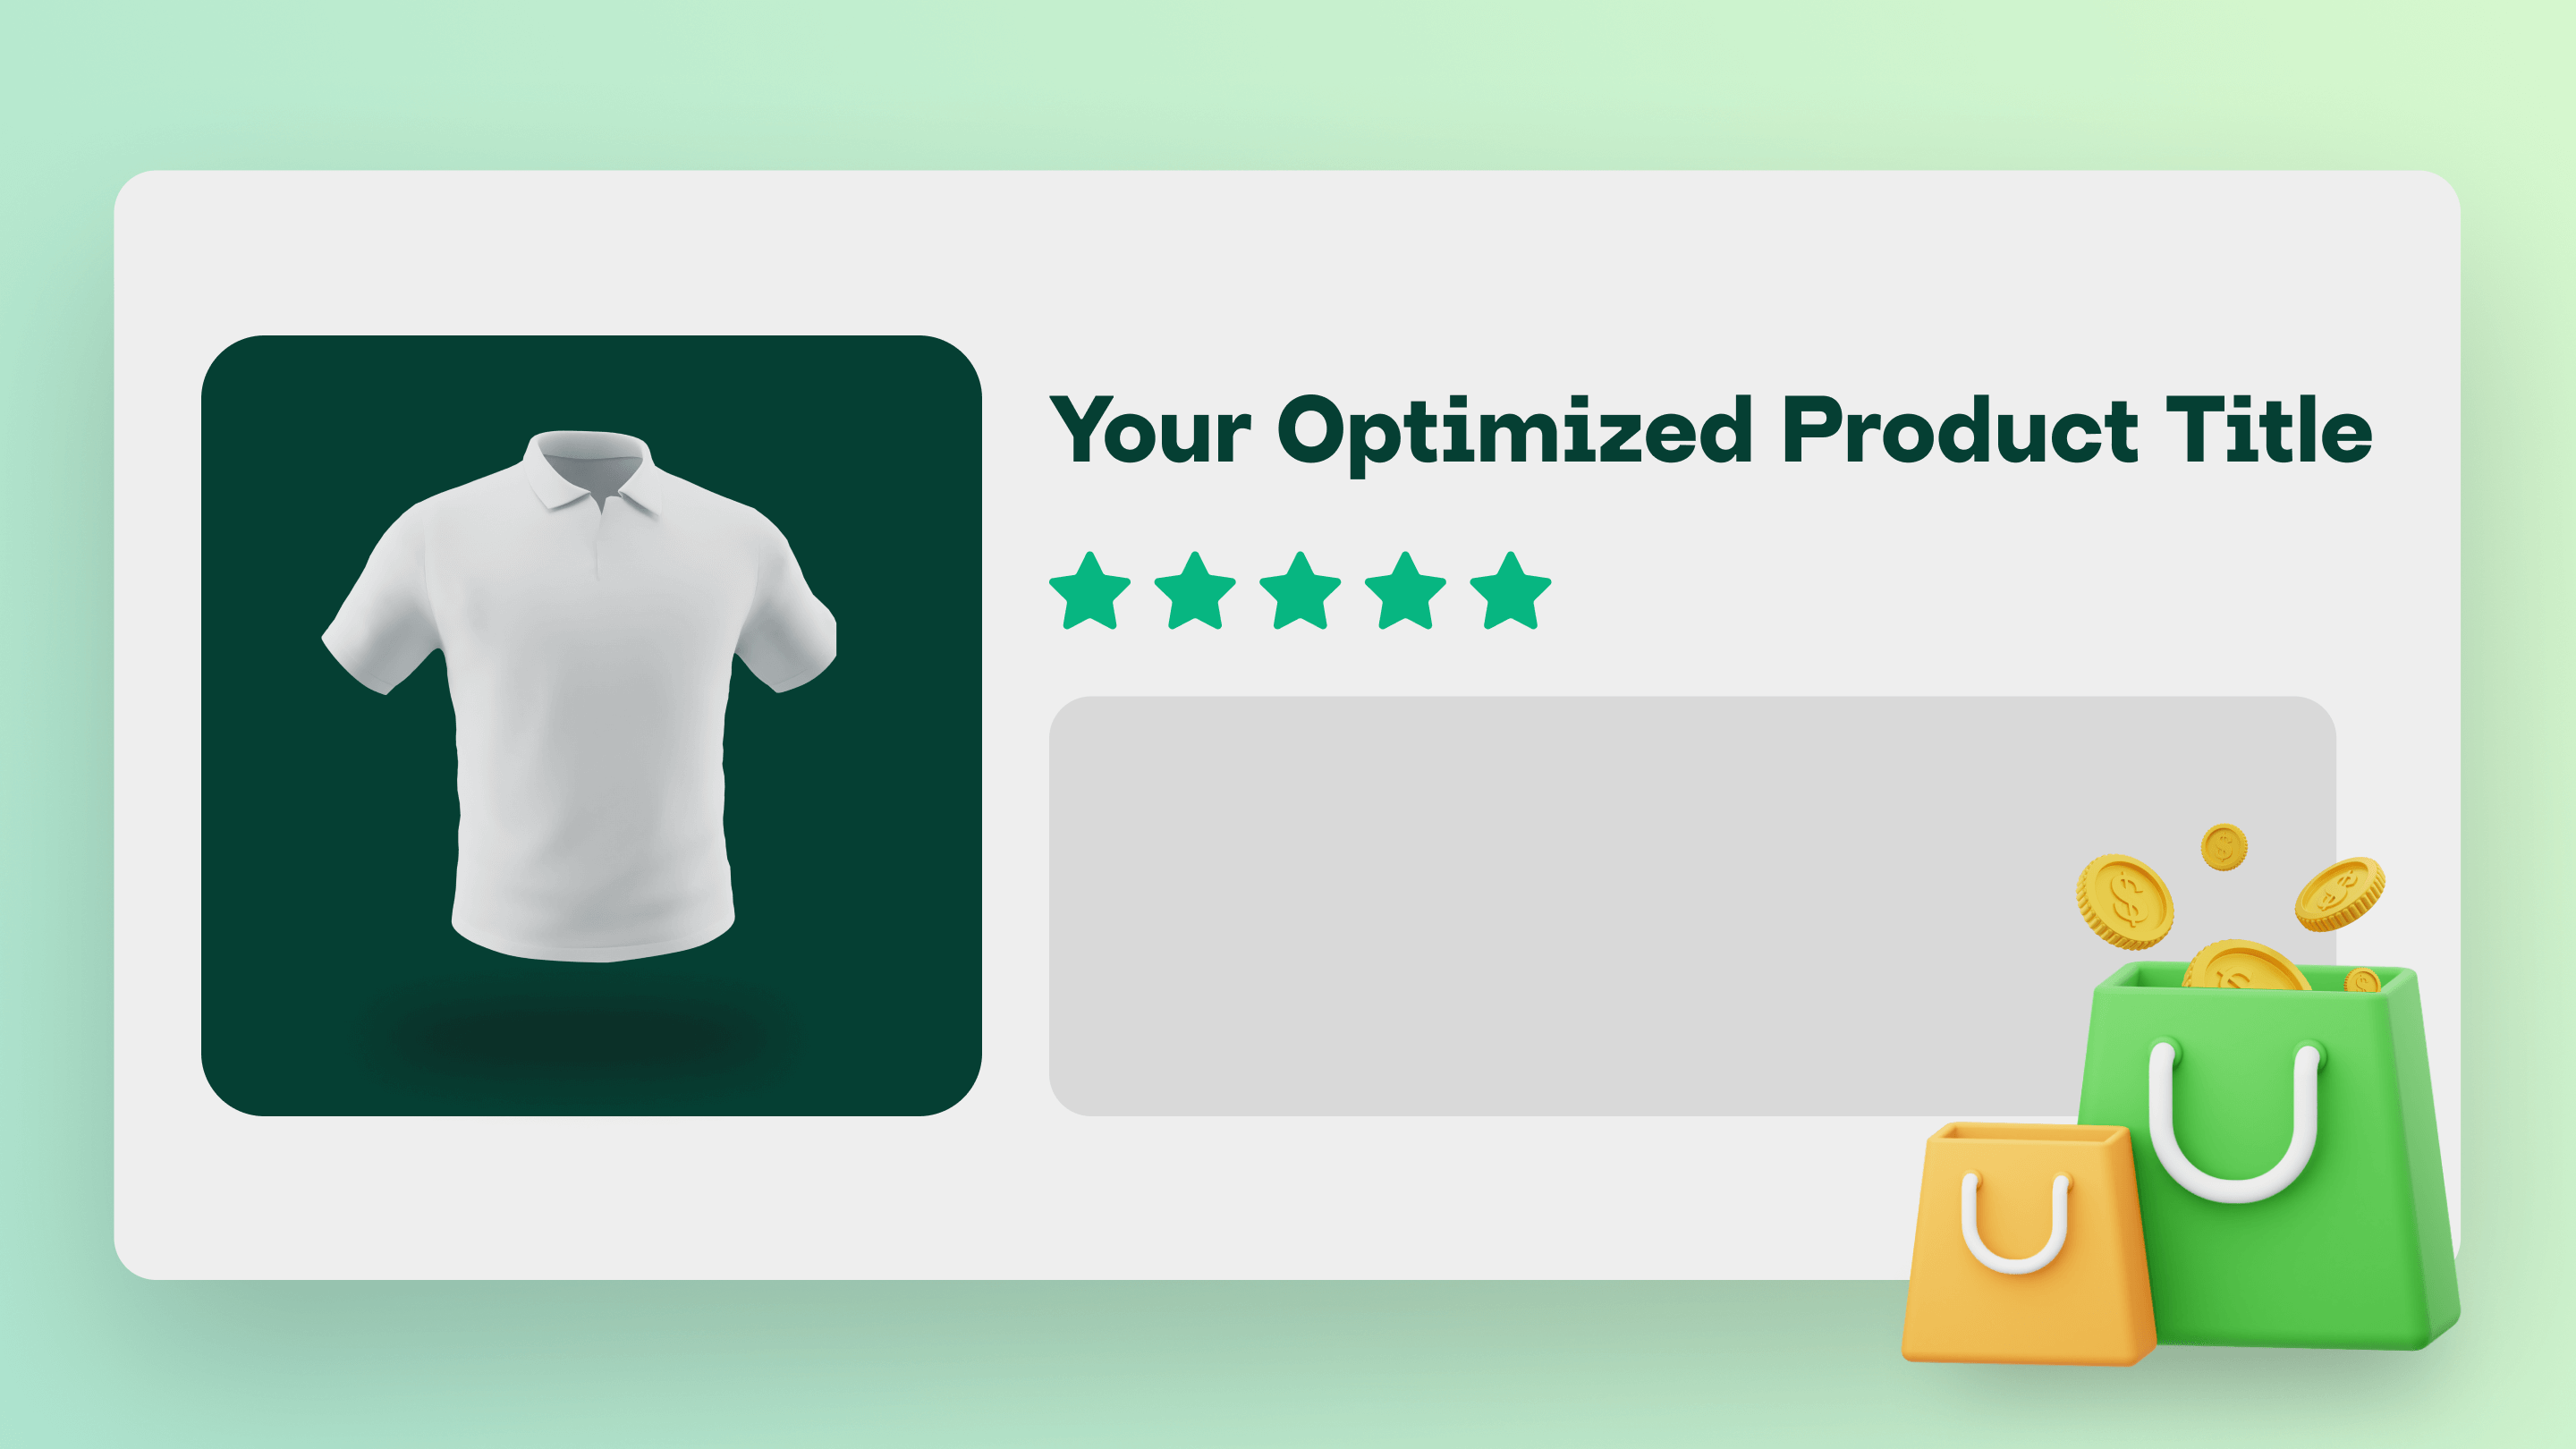 product title optimization guide to help online stores improve their sales on online marketplaces